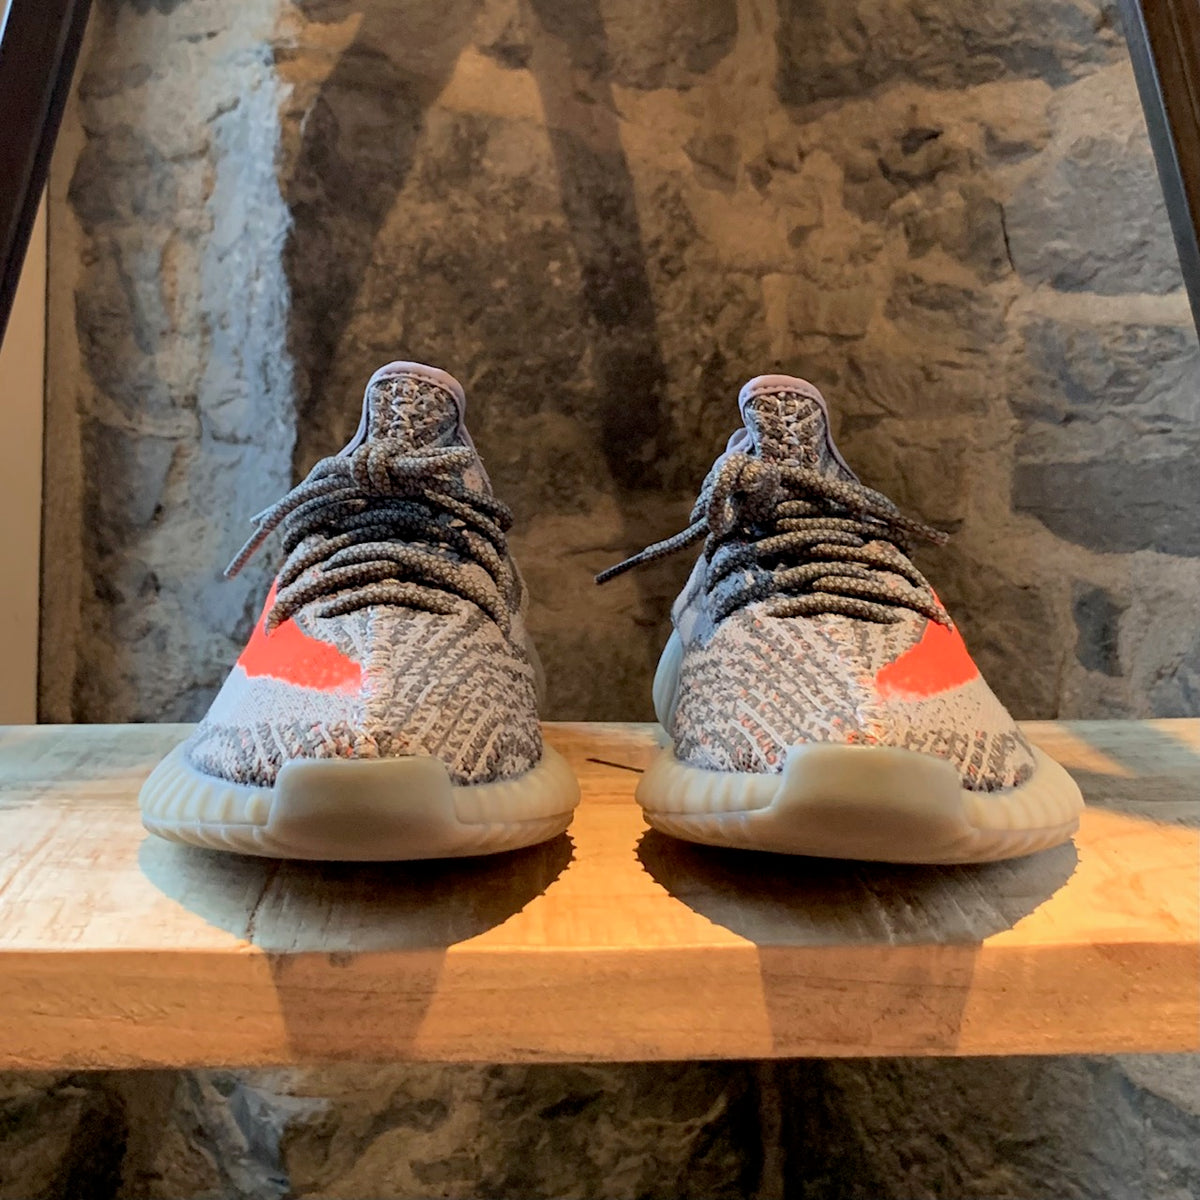 Adidas Yeezy Boost 350 V2 Beluga Steel Grey Sneakers – Boutique LUC.S